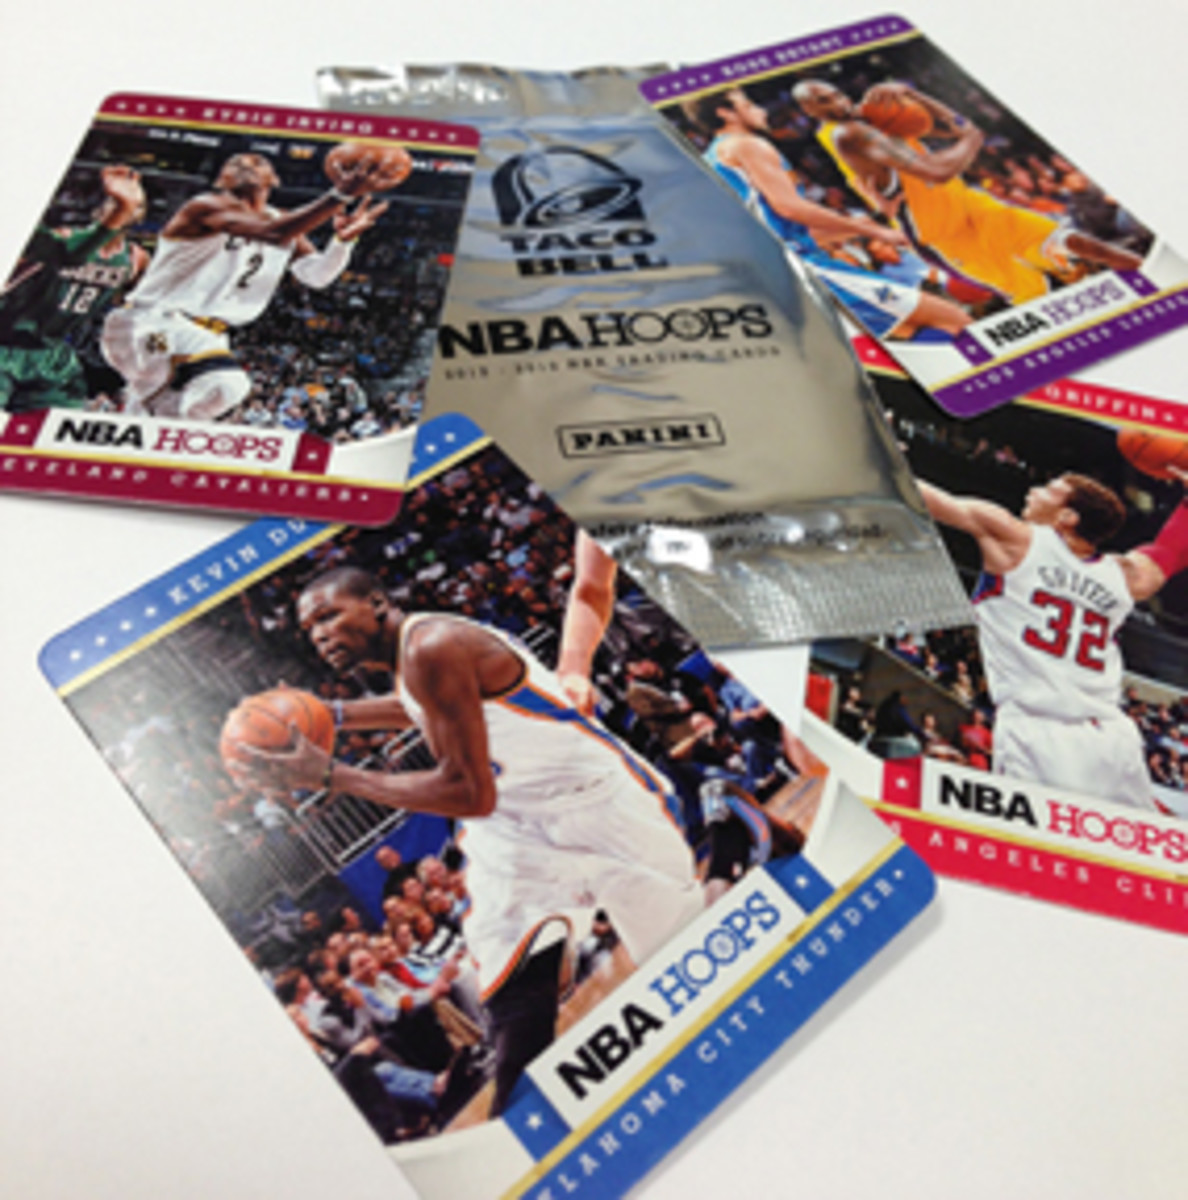 Basketball cards are at Taco Bell now through May.